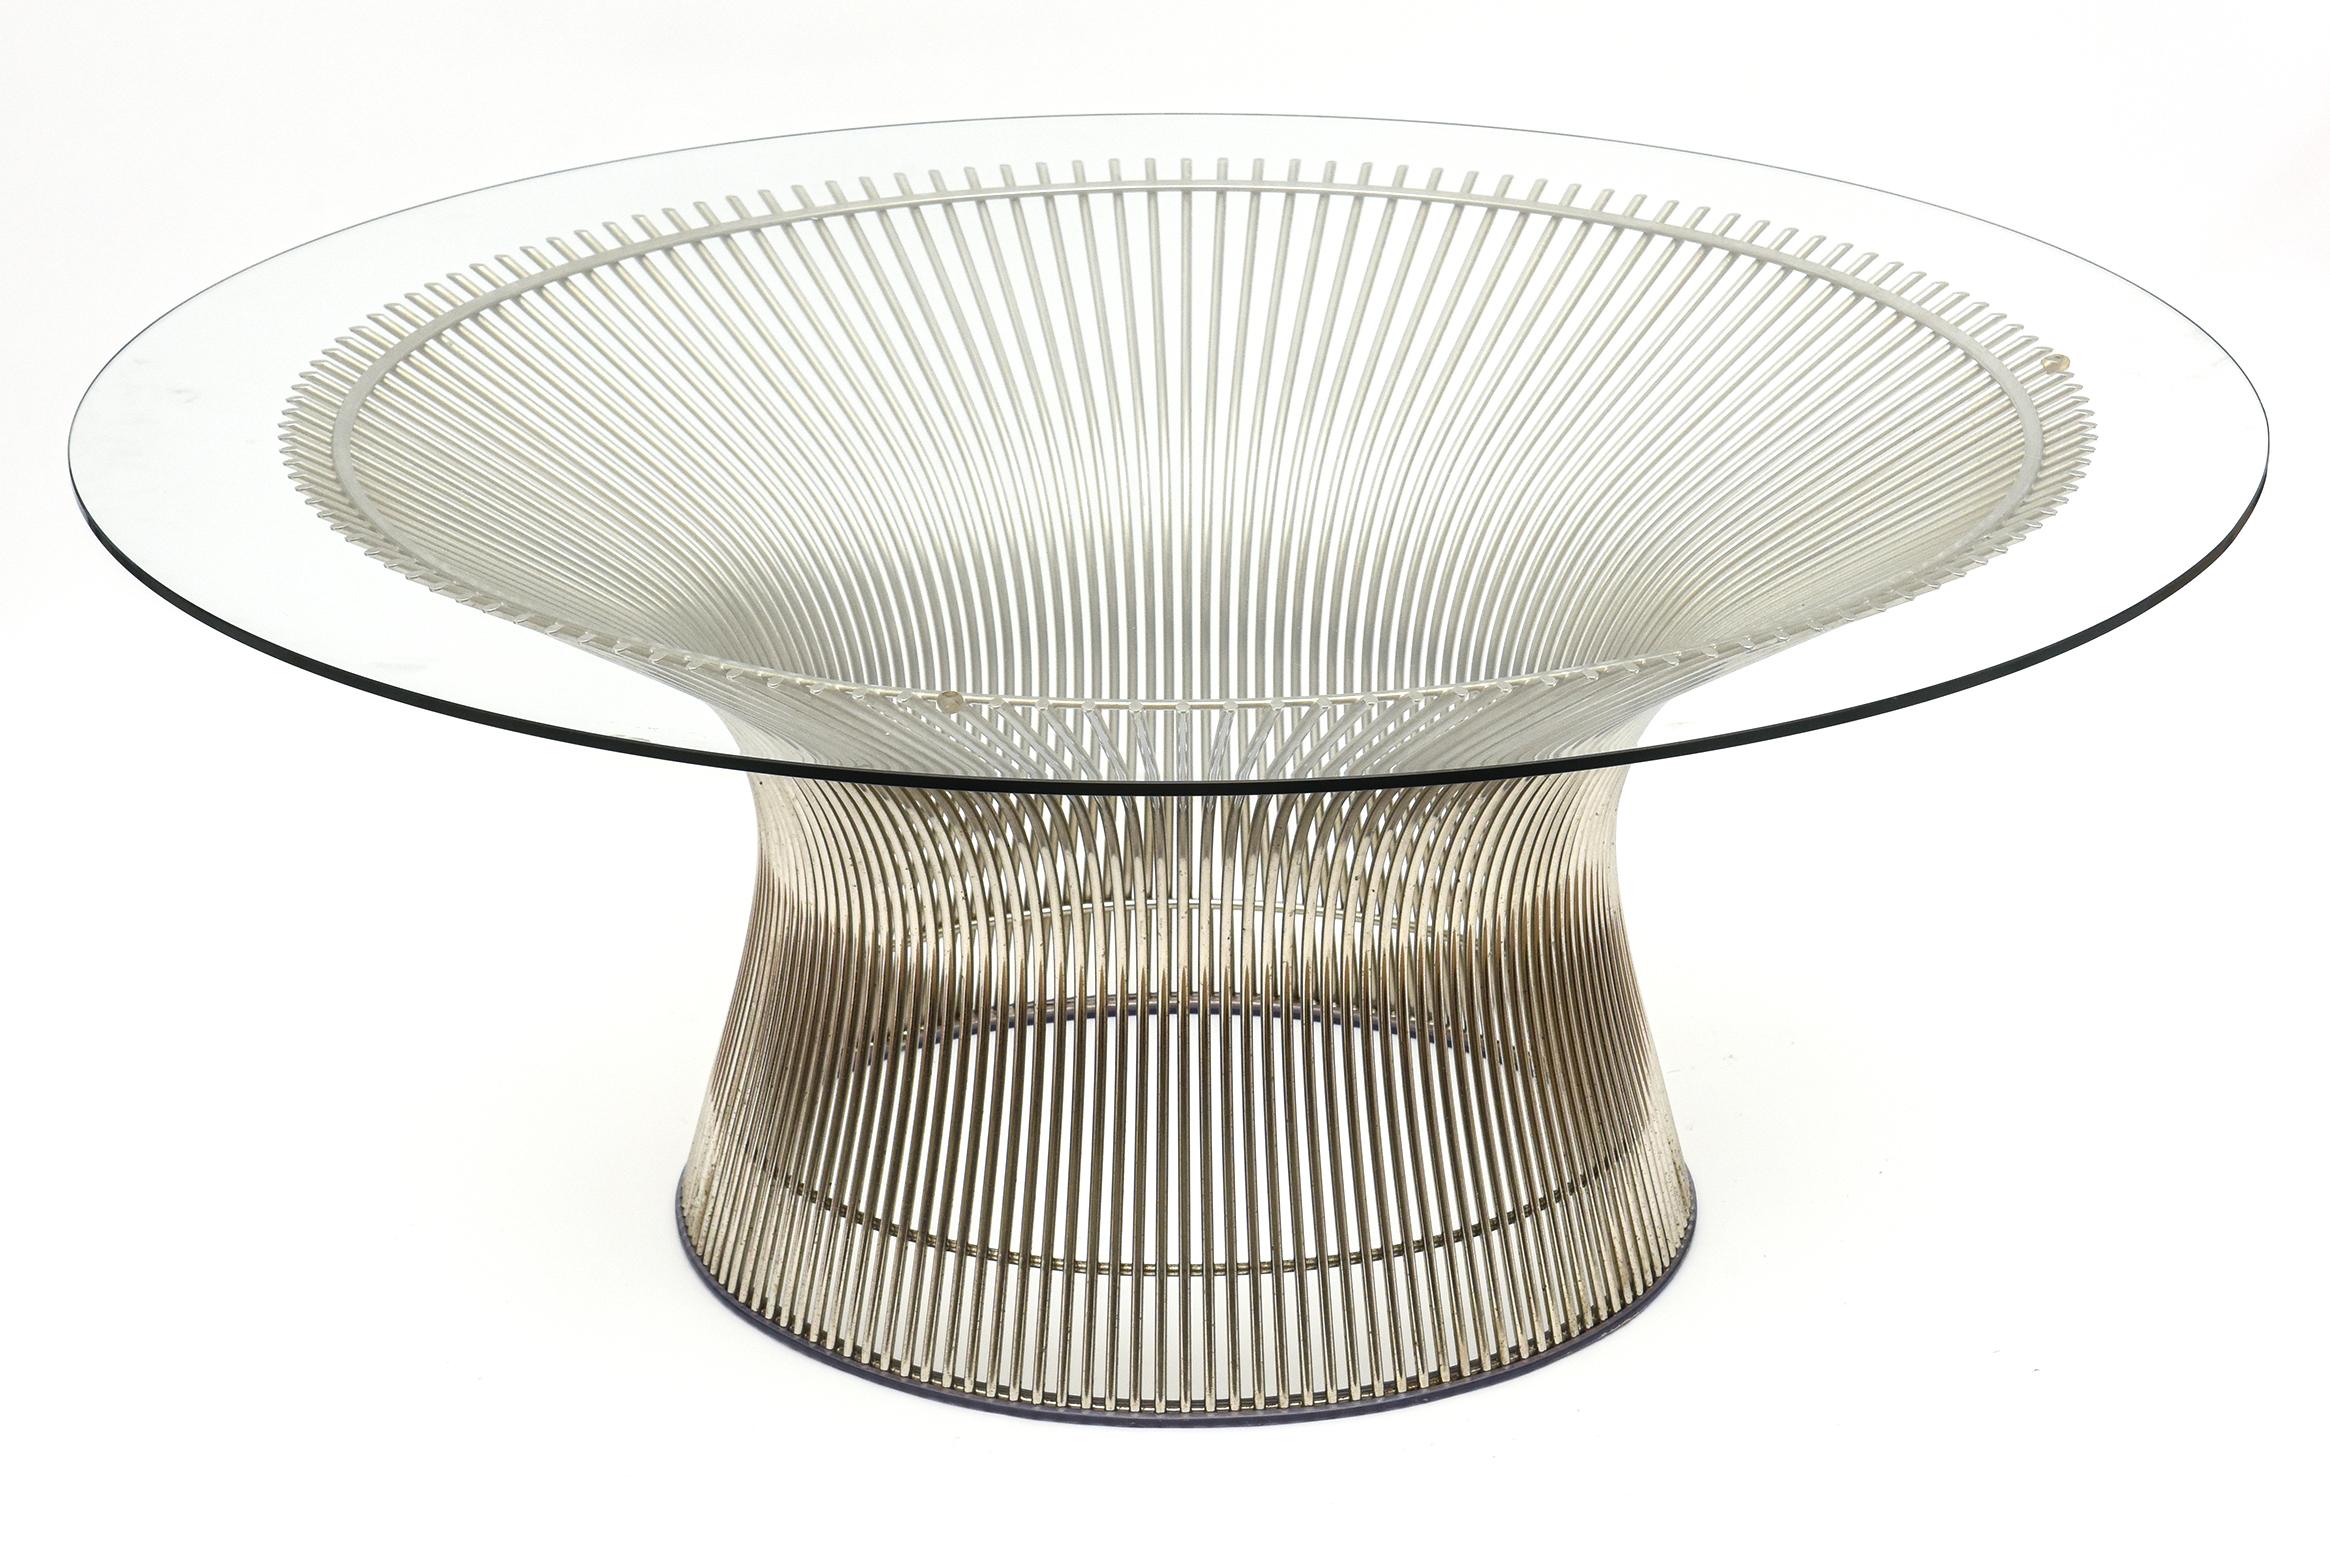 This iconic authentic original Warren Platner chromed wire cocktail table was the original design and production from the 1950's. Knoll was the manufacturer. The original beveled 1/2 thick glass top was chipped so was replace with a 36